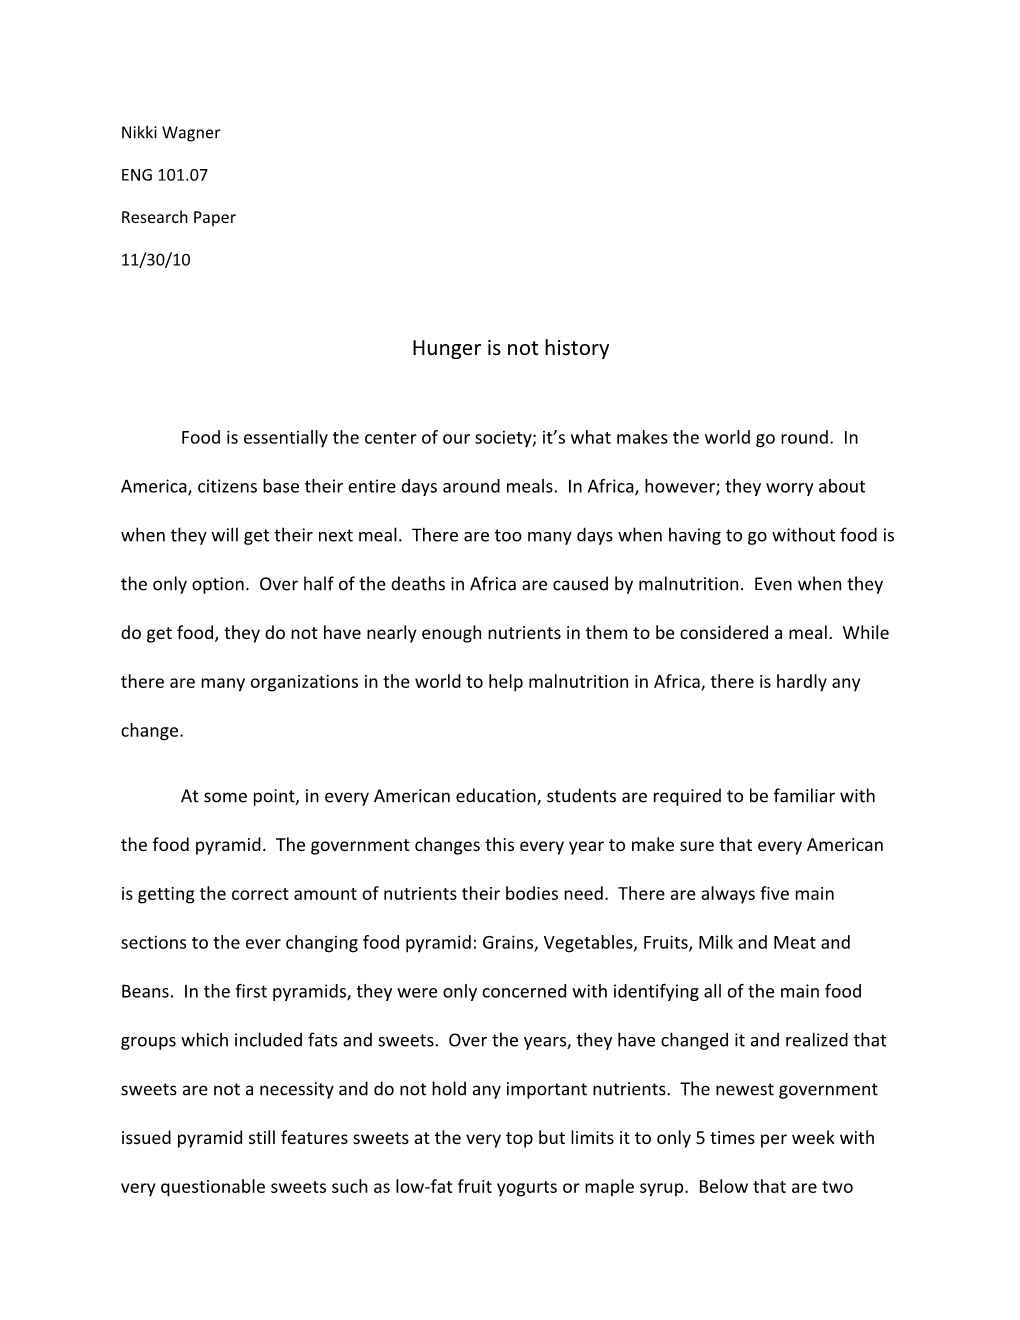 Research Paper s1